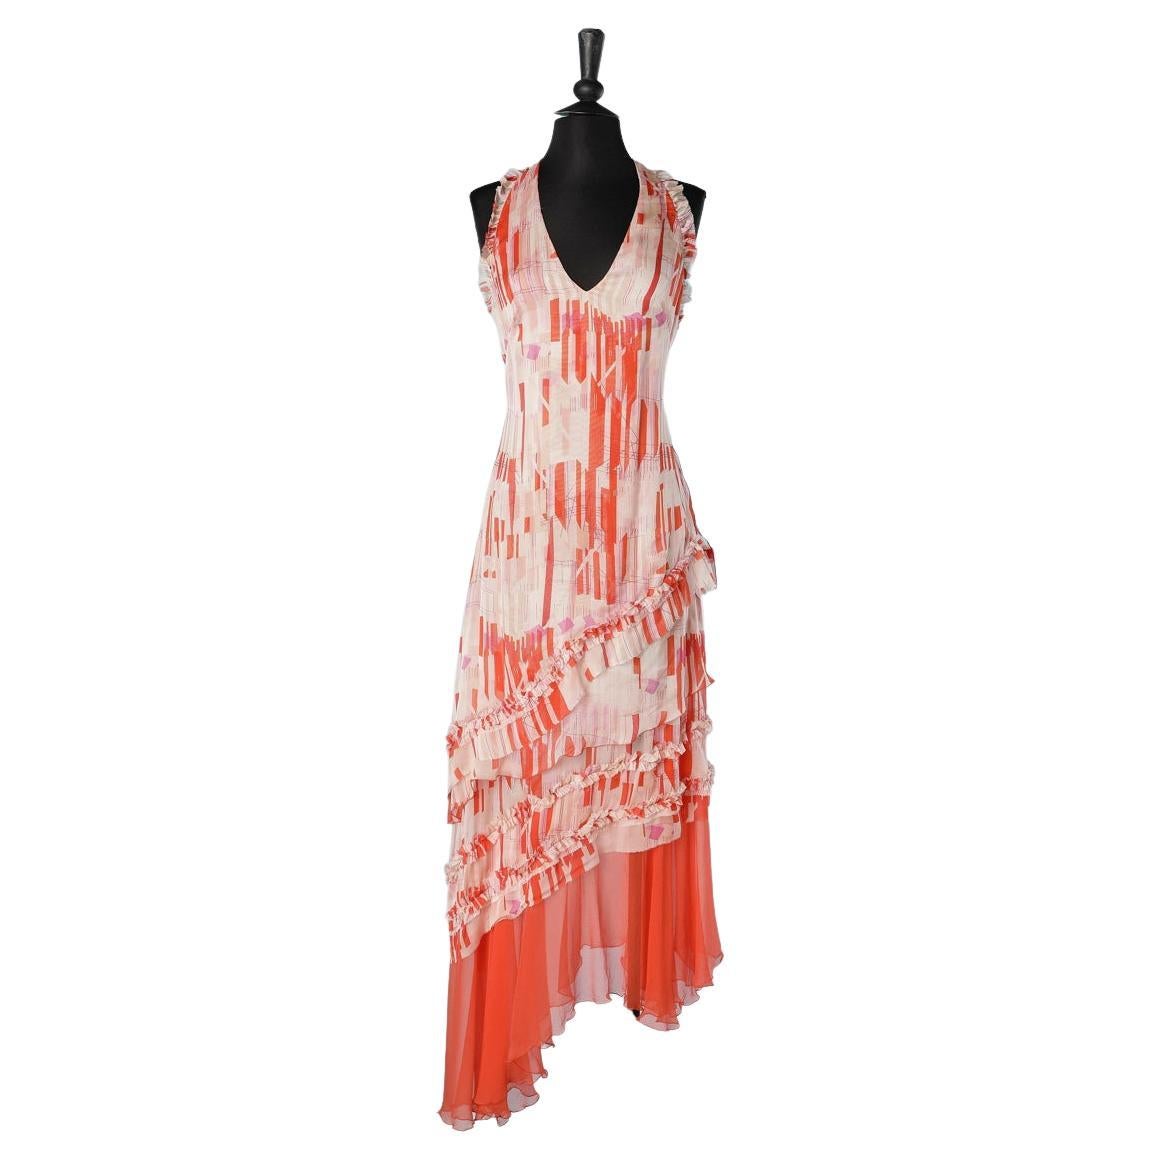 Backless asymmetrical cocktail dress in printed chiffon and ruffles Mugler NEW 